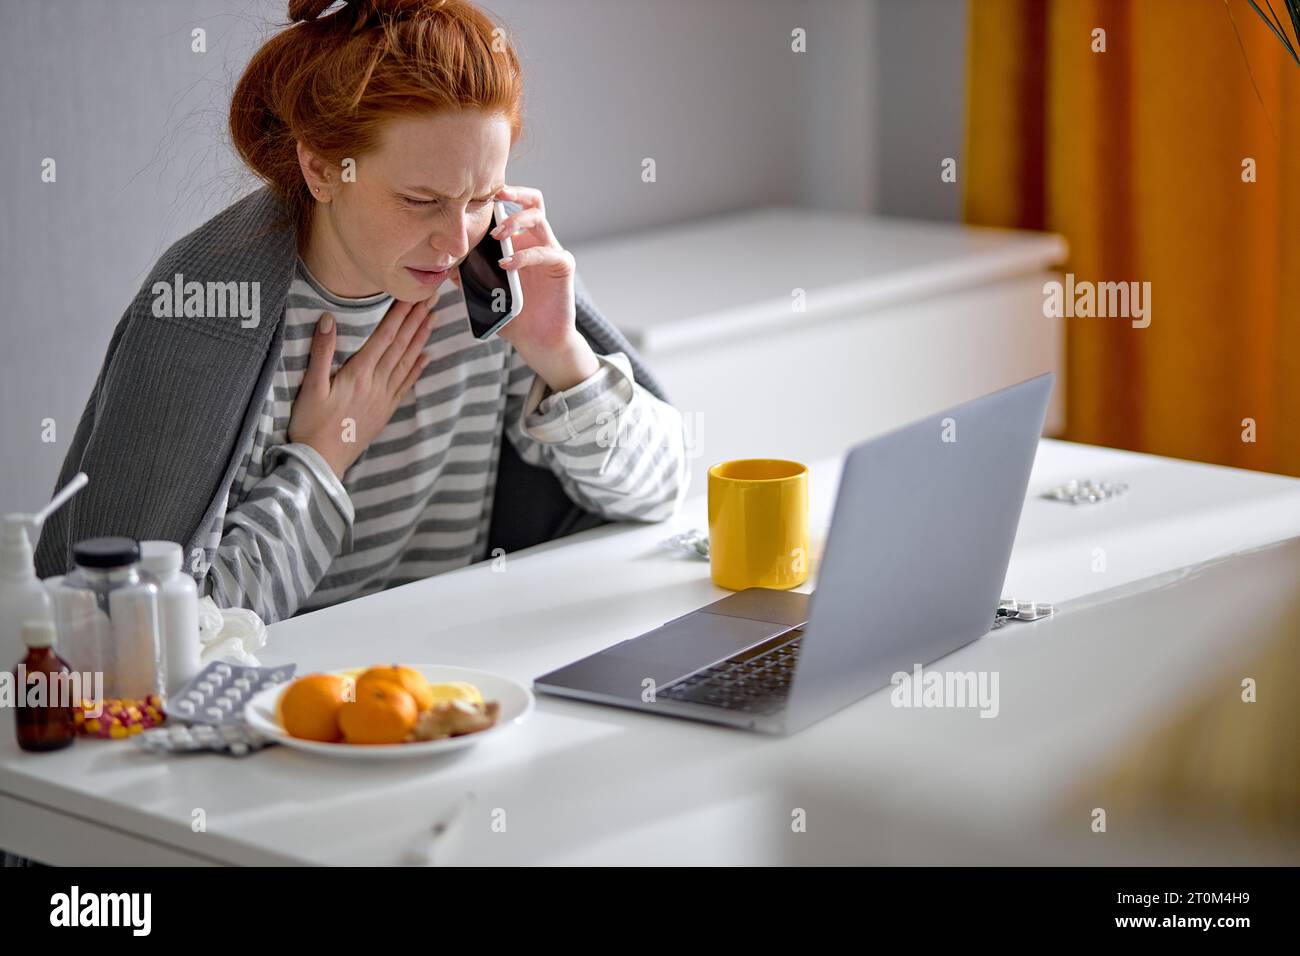 sick frustrated angry redhead girl making phone call to friend, family, doctor, complaining about her terrible illness, close up side view portrait co Stock Photo